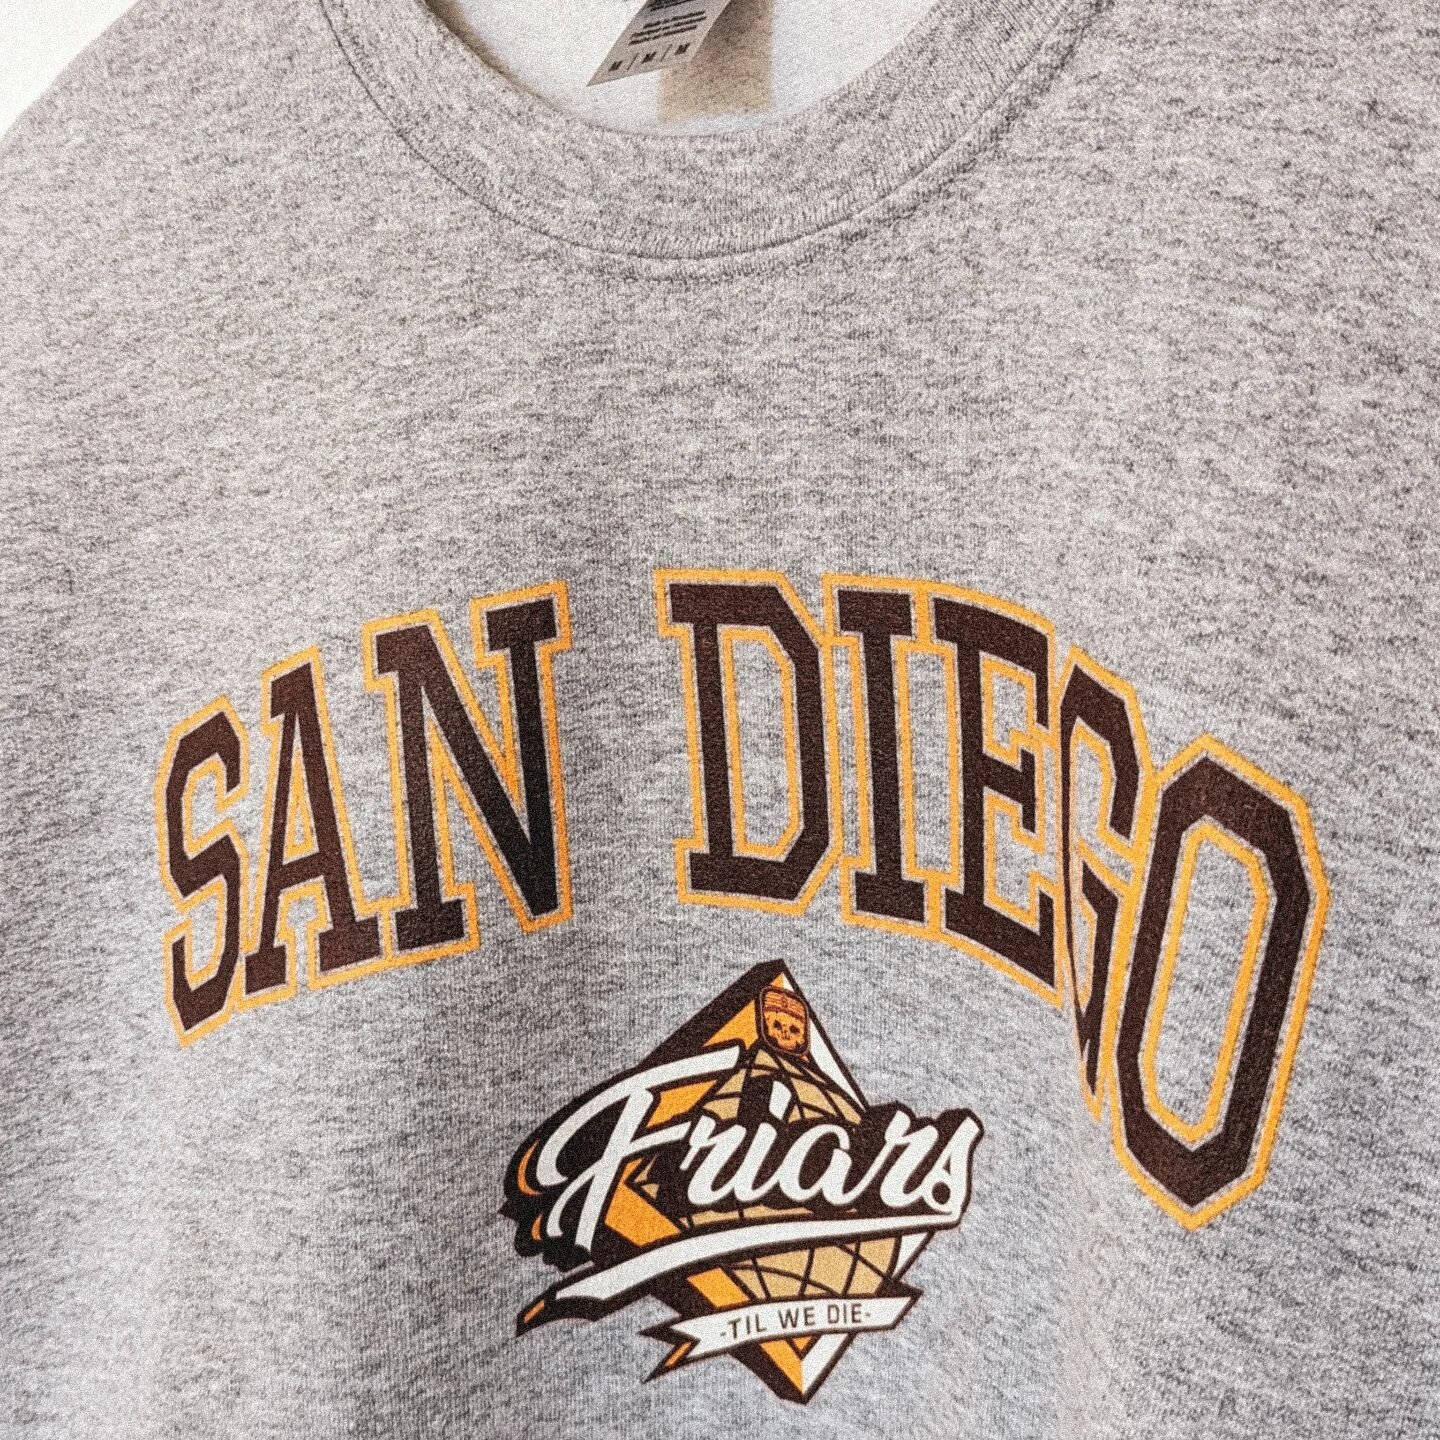 Friar fever continues into the Padres Team Store for NLCS merch